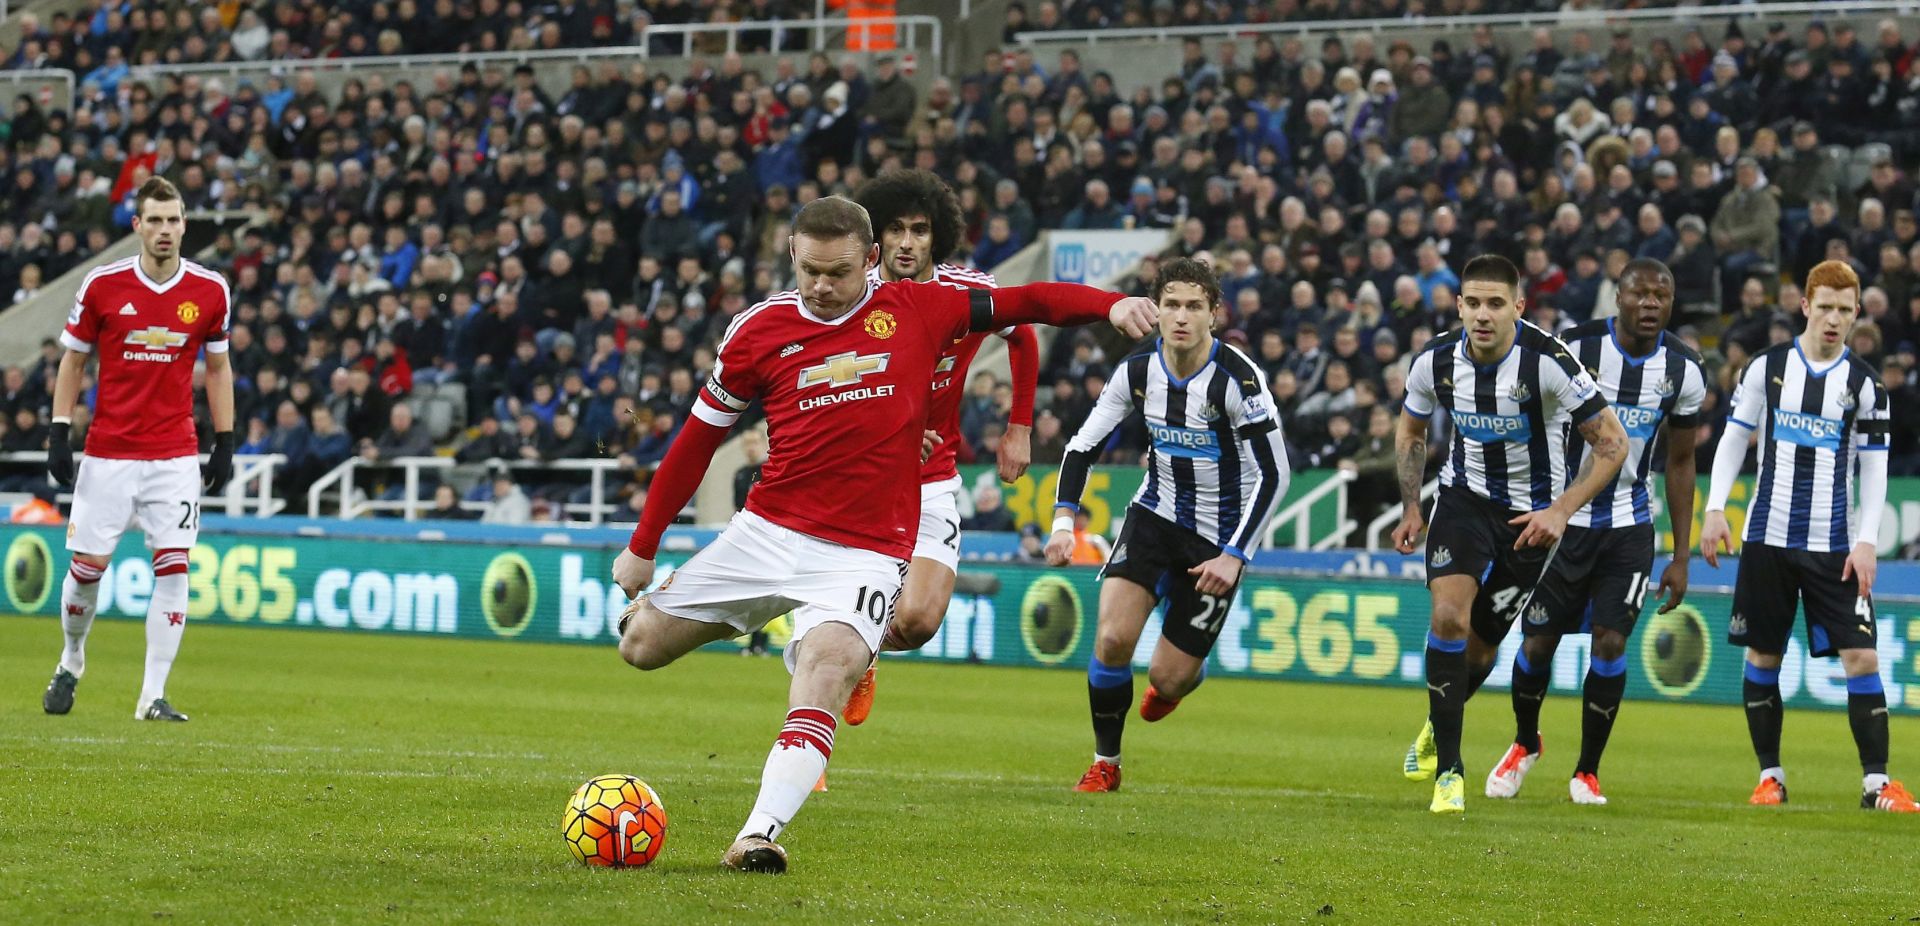 epa05099020 Manchester United's Wayne Rooney scores a penalty during the English Premier League soccer match between Newcastle United and Manchester United at St James' Park in Newcastle, Britain, 12 January 2016.  EPA/LINDSEY PARNABY DataCo terms and conditions apply http//www.epa.eu/downloads/DataCo-TCs.pdf